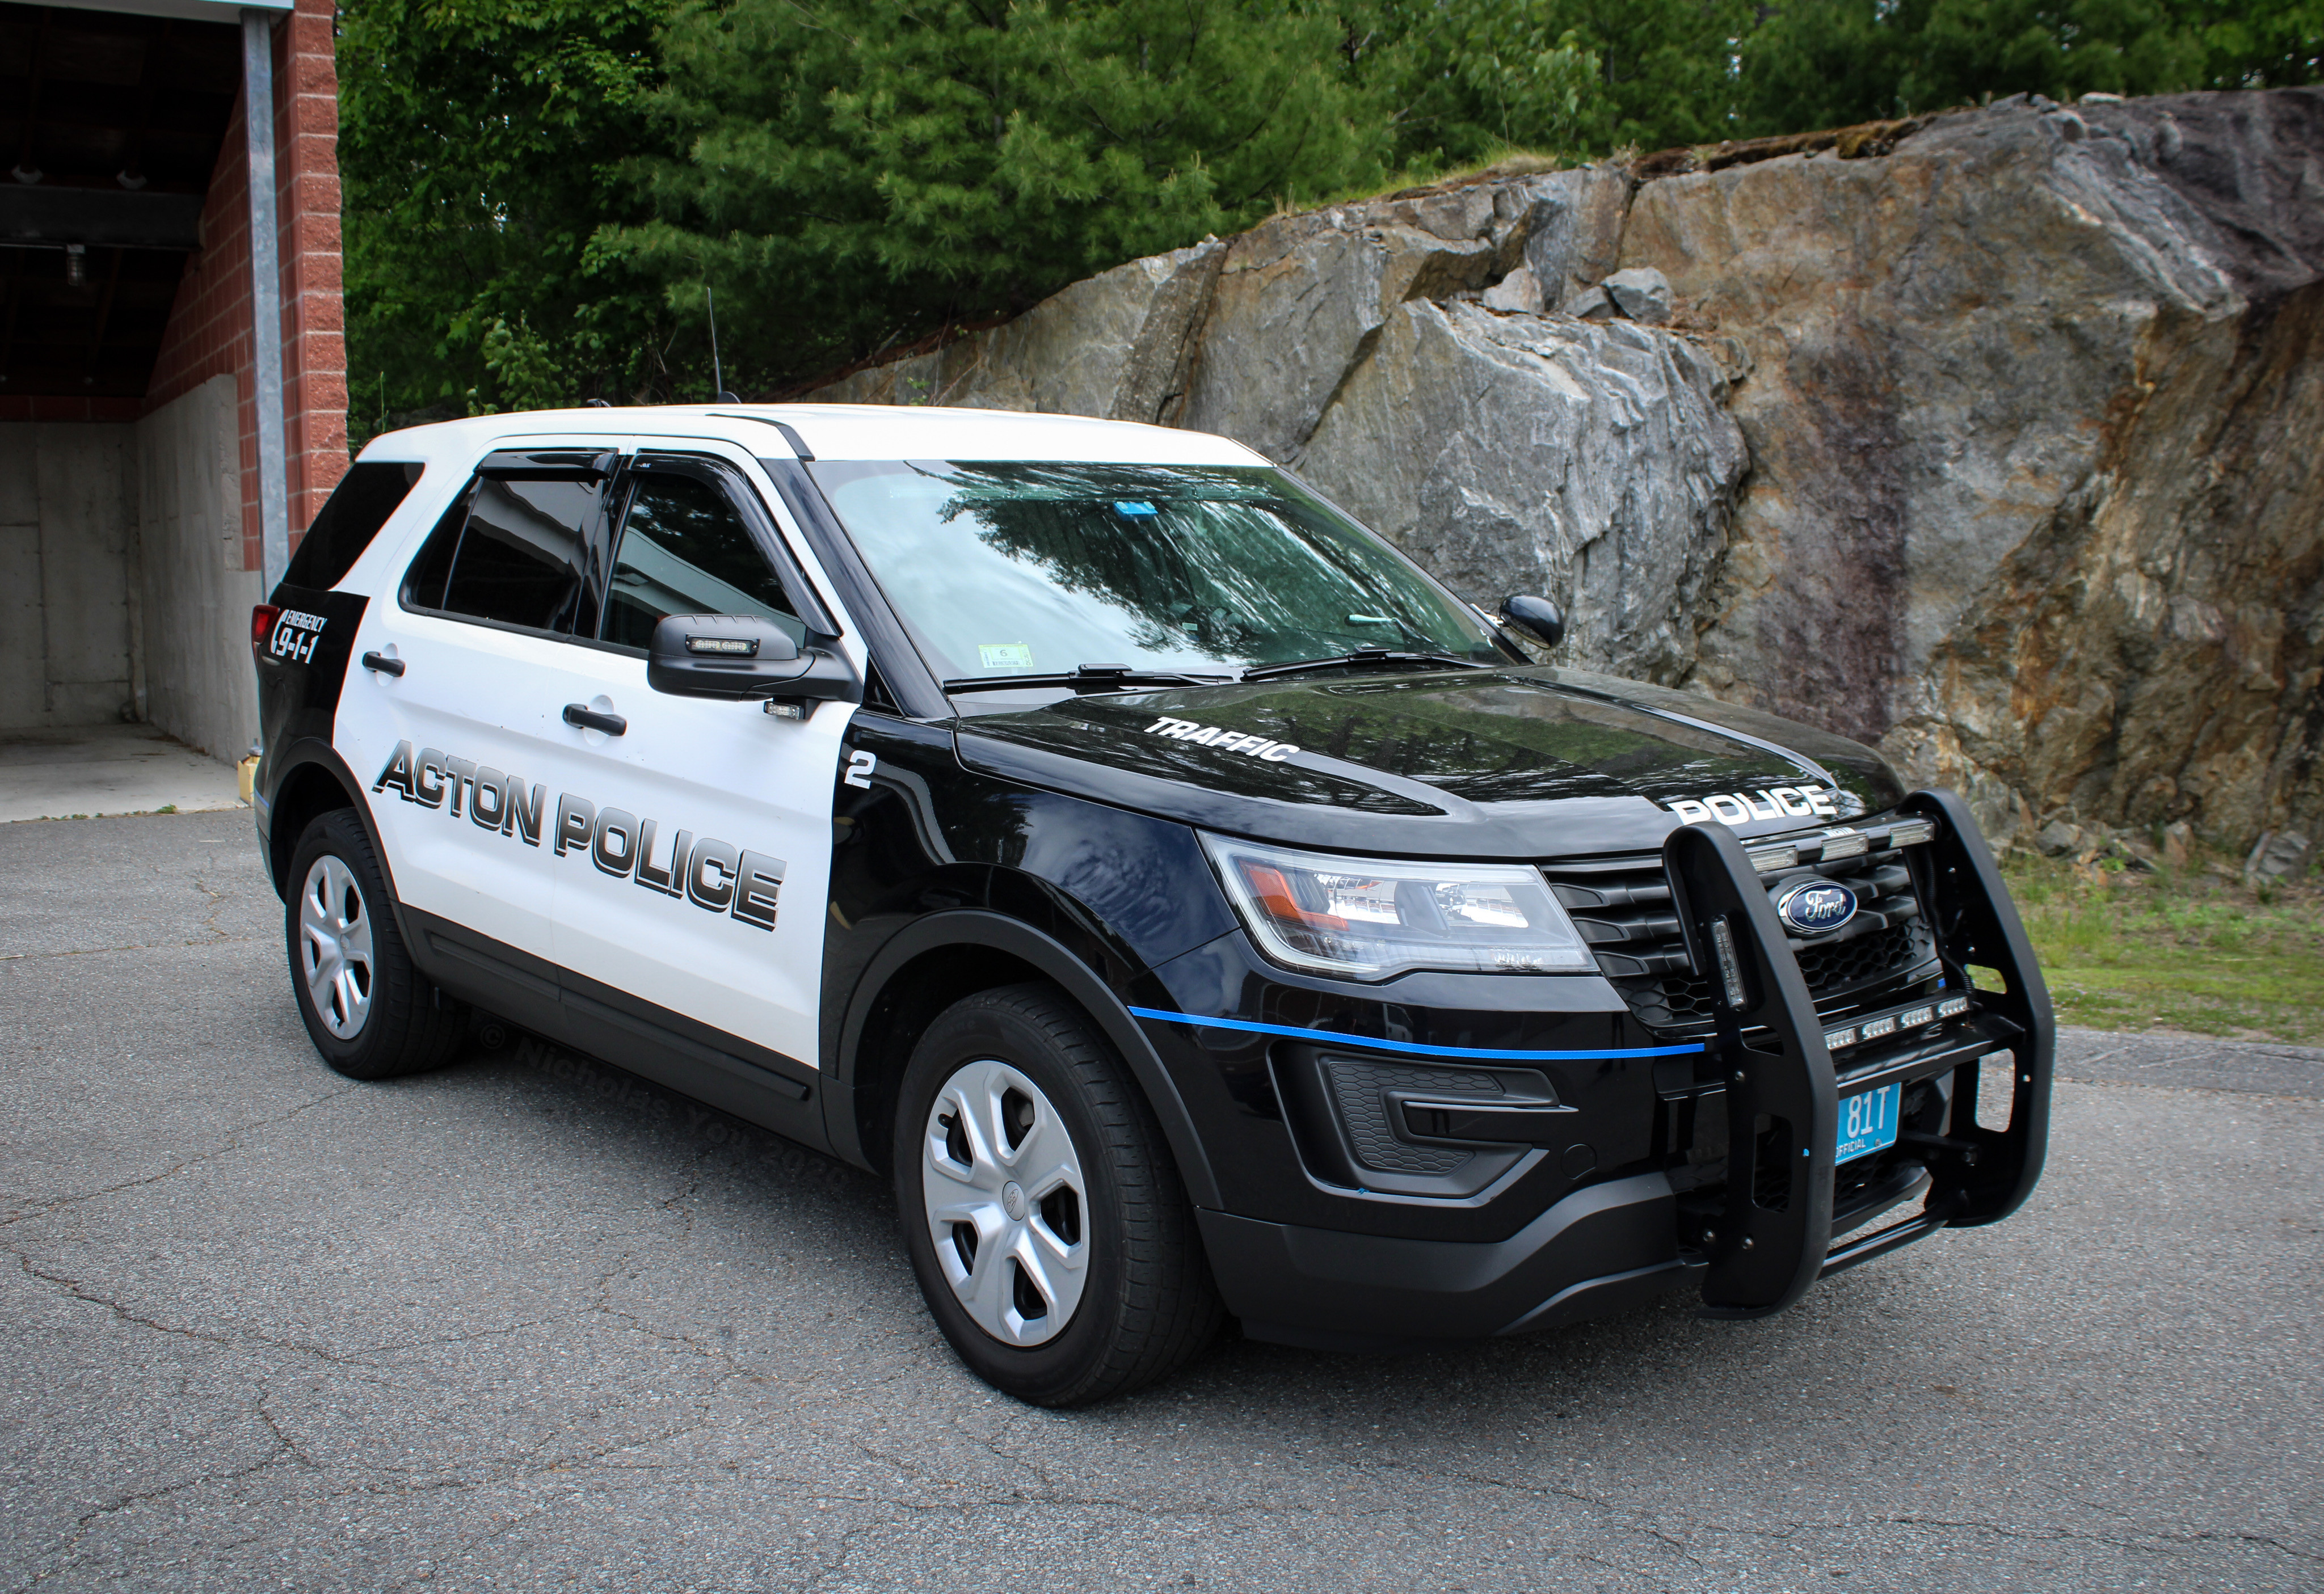 A photo  of Acton Police
            Car 2, a 2017 Ford Police Interceptor Utility             taken by Nicholas You